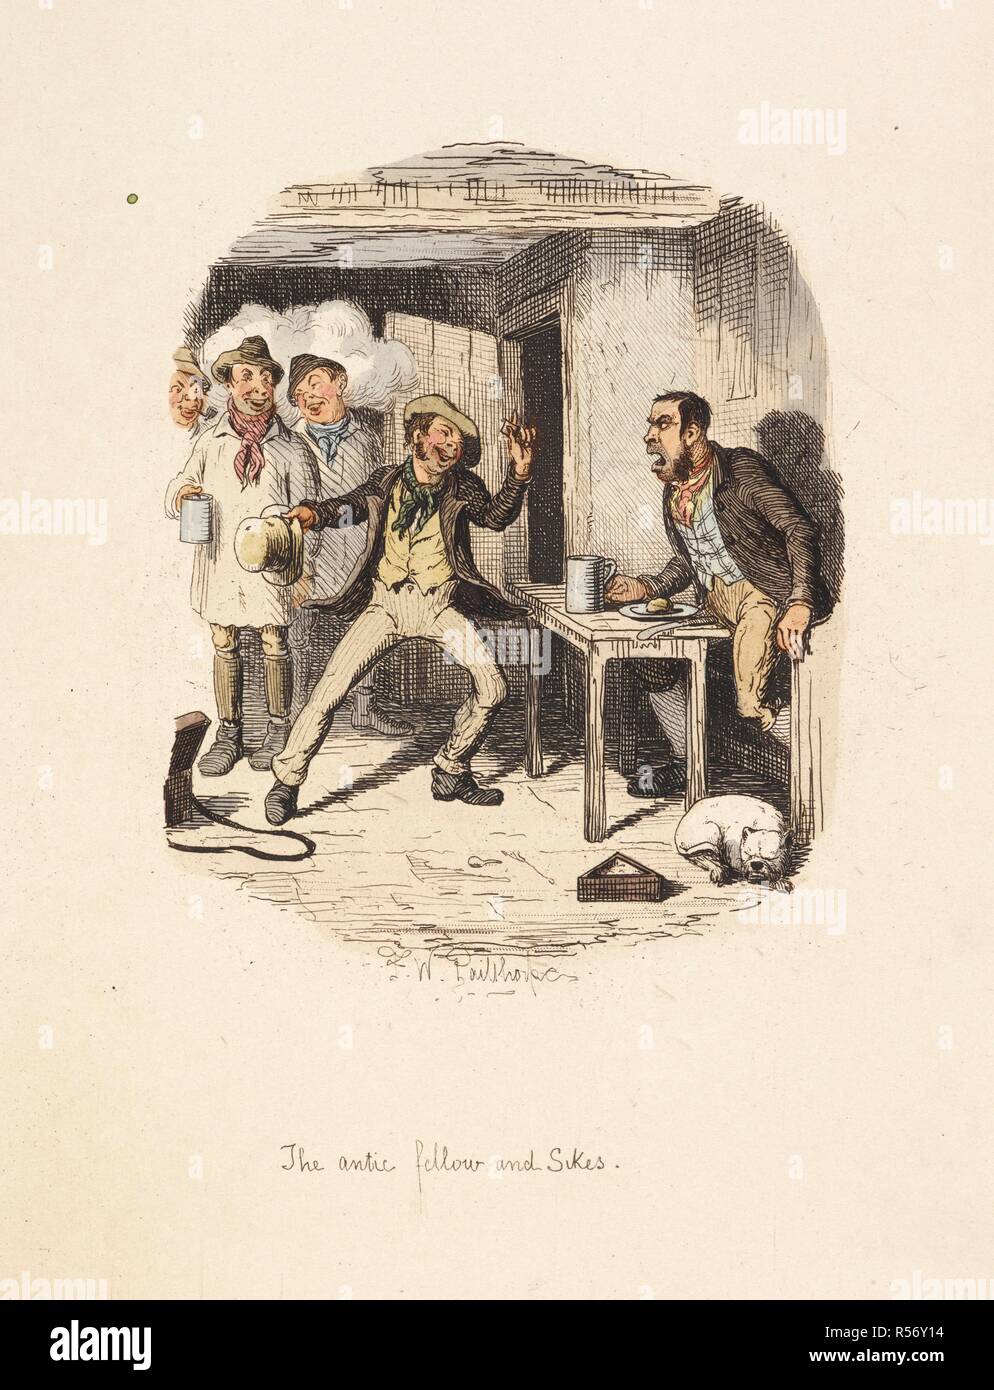 'The antic fellow and Sikes.' Bill Sikes takes refuge in a public house in Hendon: 'There was a fire in the tap room and ... This was an antic fellow, half pedlar and half mountebank, who travelled about the country on foot to vend hones, stops, razors, washballs, harness-paste, medicine for dogs and horses ...'. Oliver Twist by Charles Dickens. London : Robson & Kerslake, 1885. Source: Dex.312.(2). Stock Photo